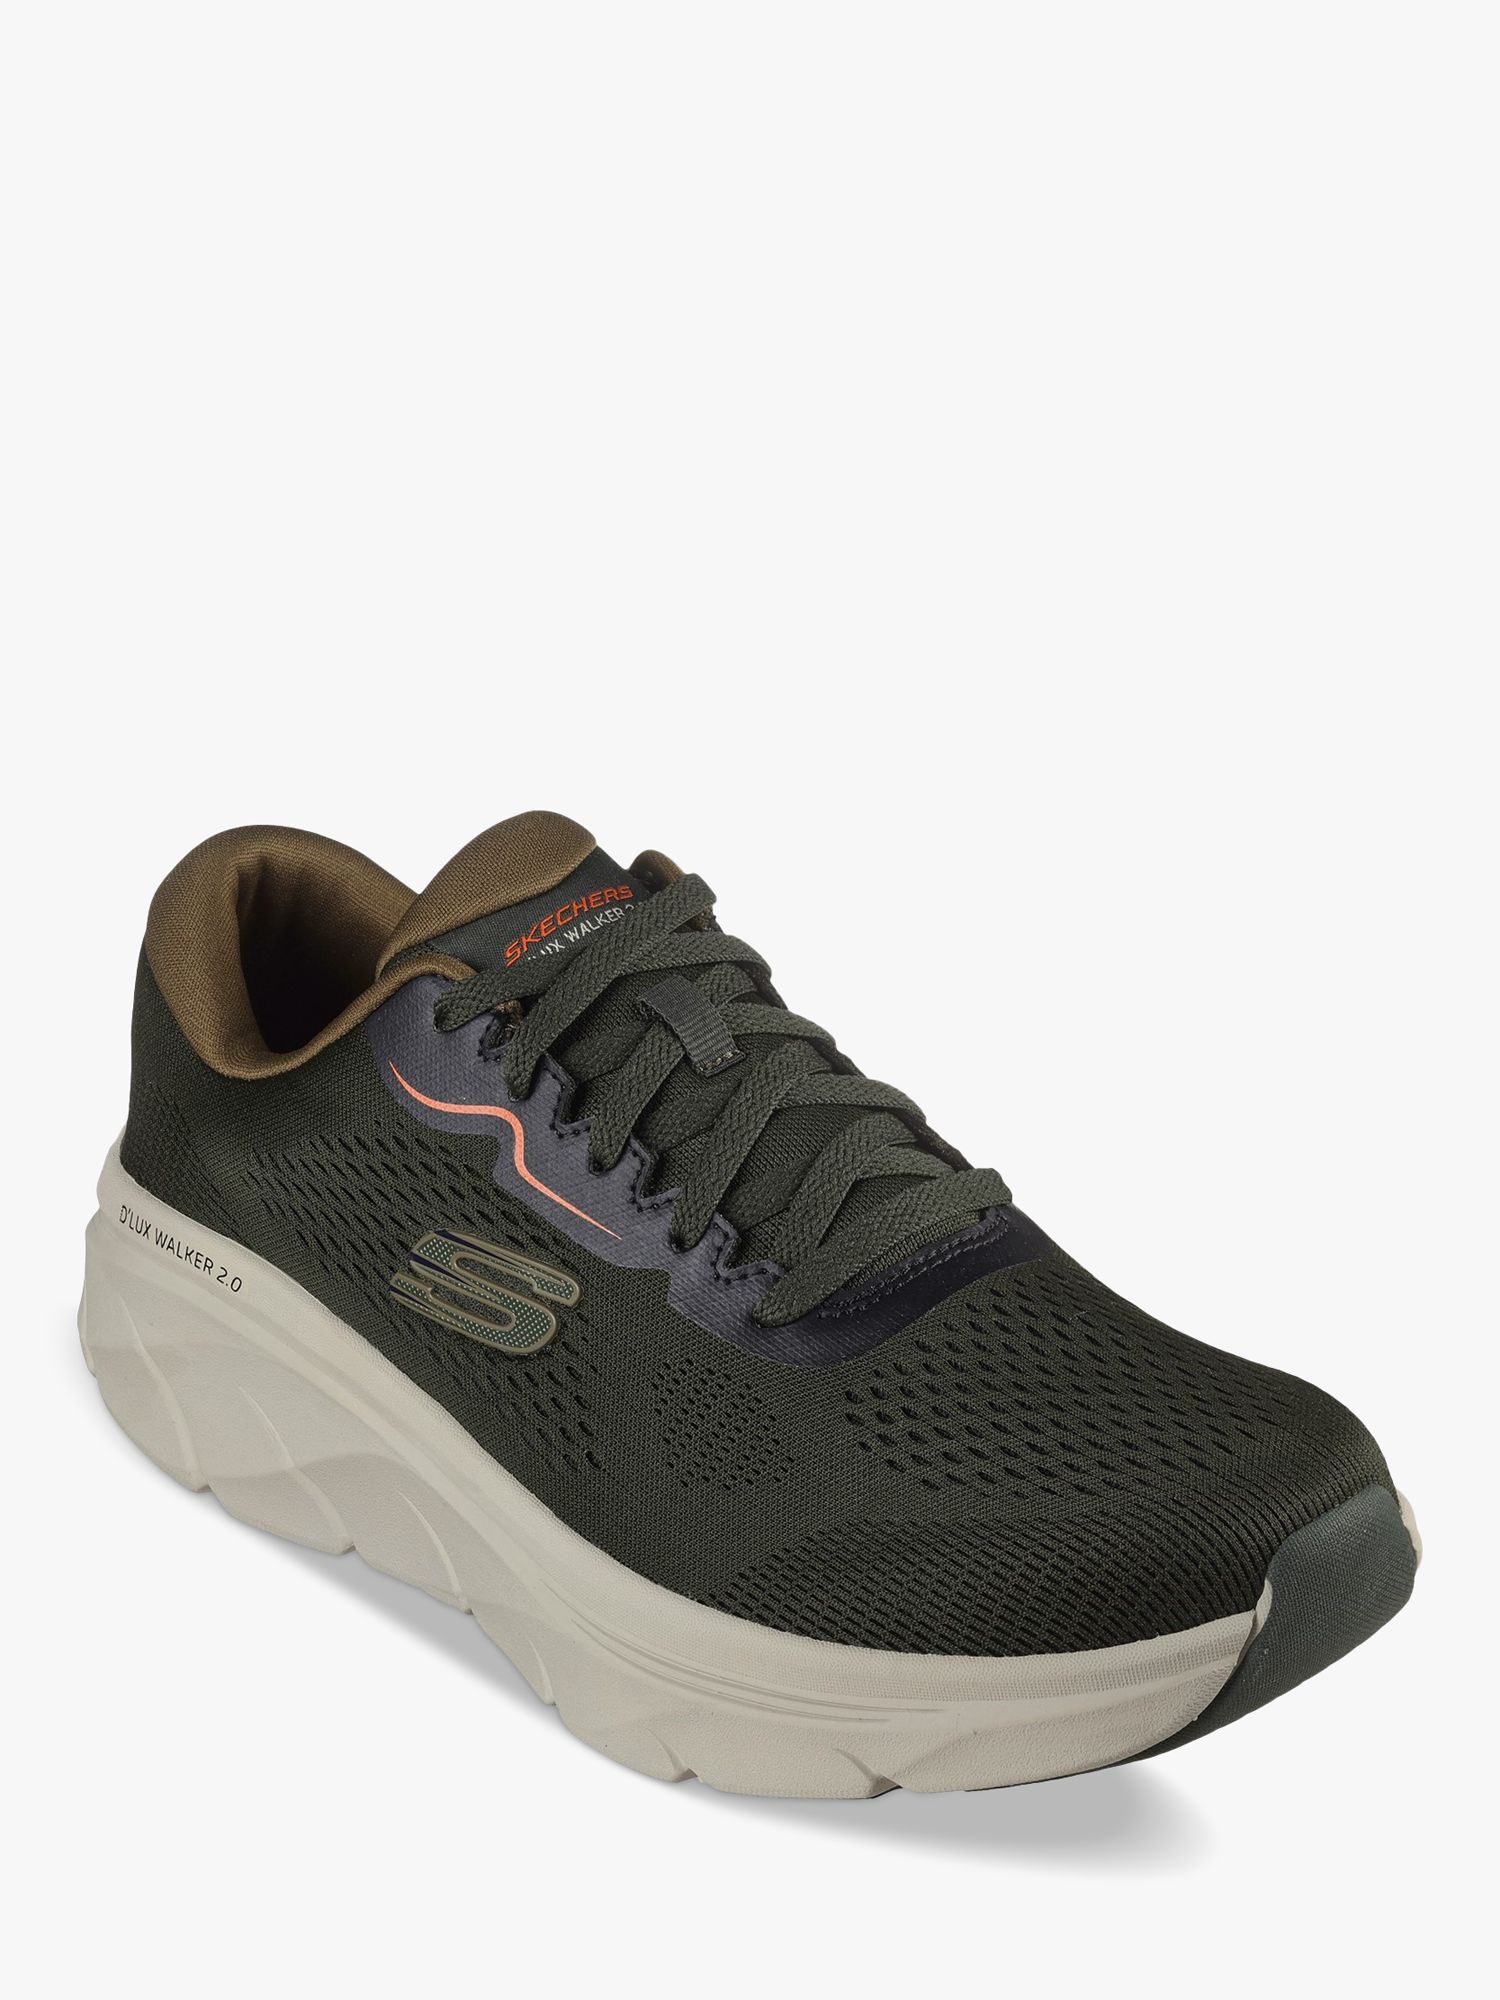 Skechers D'Lux Walker 2.0 Trainers, Olive at John Lewis & Partners